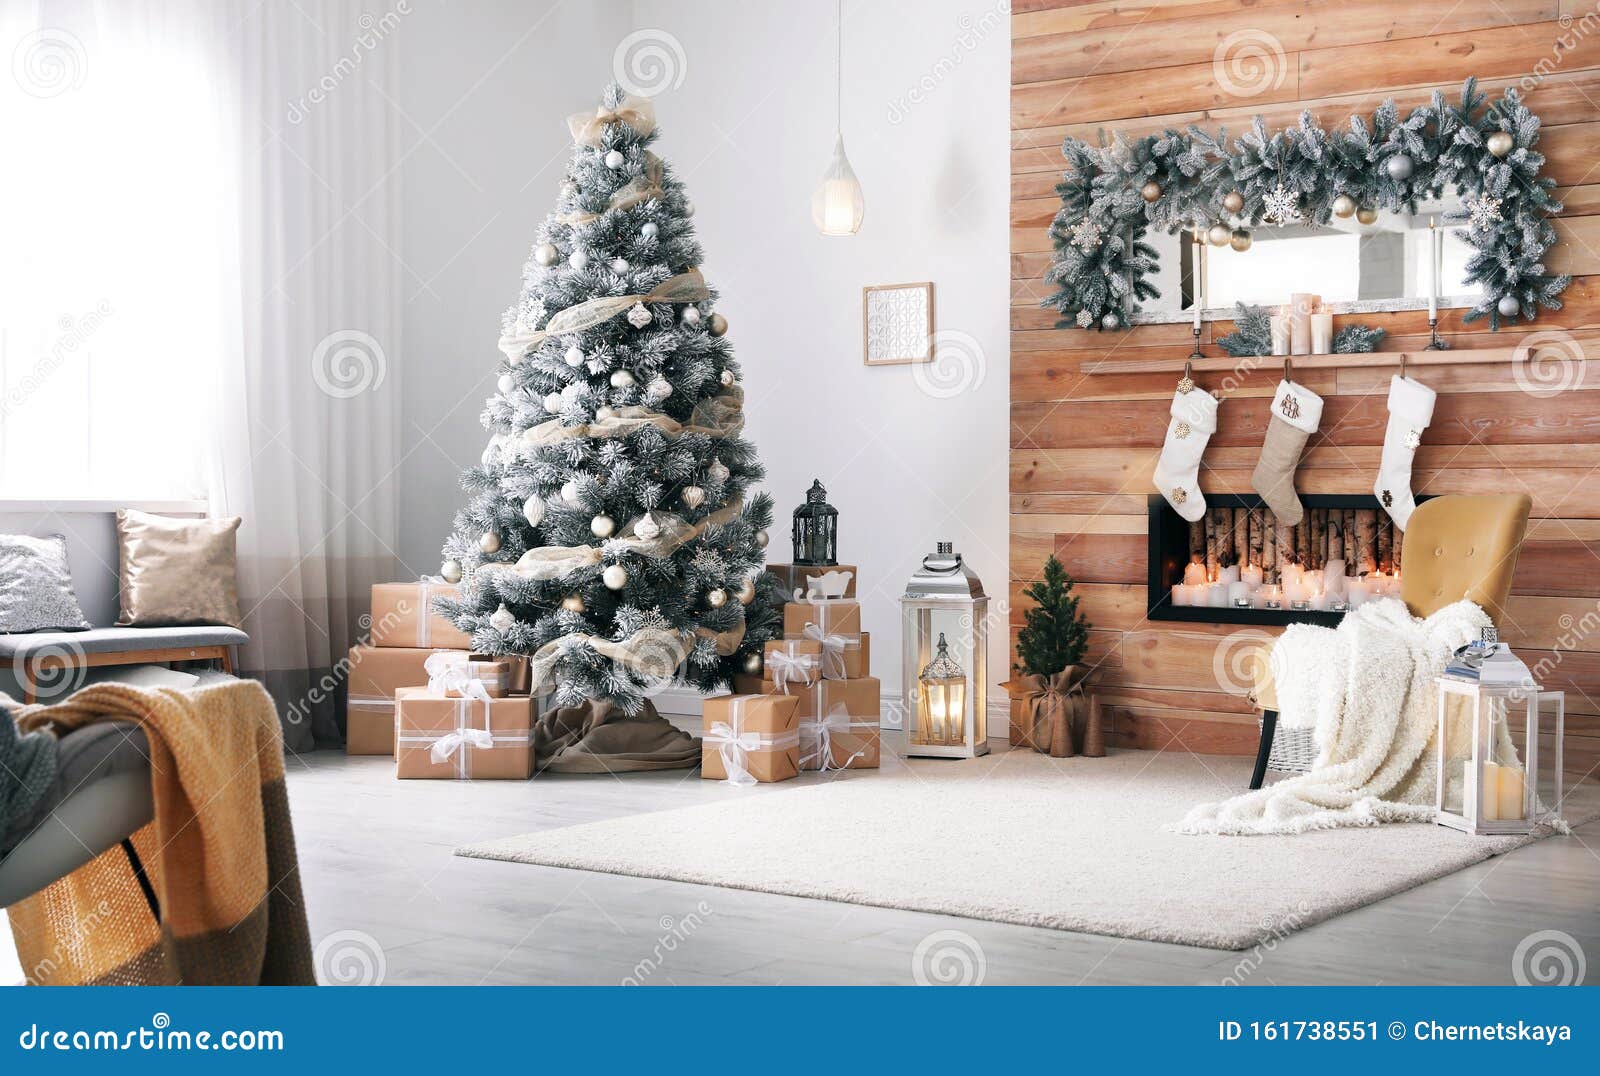 interior with decorated christmas tree and fireplace